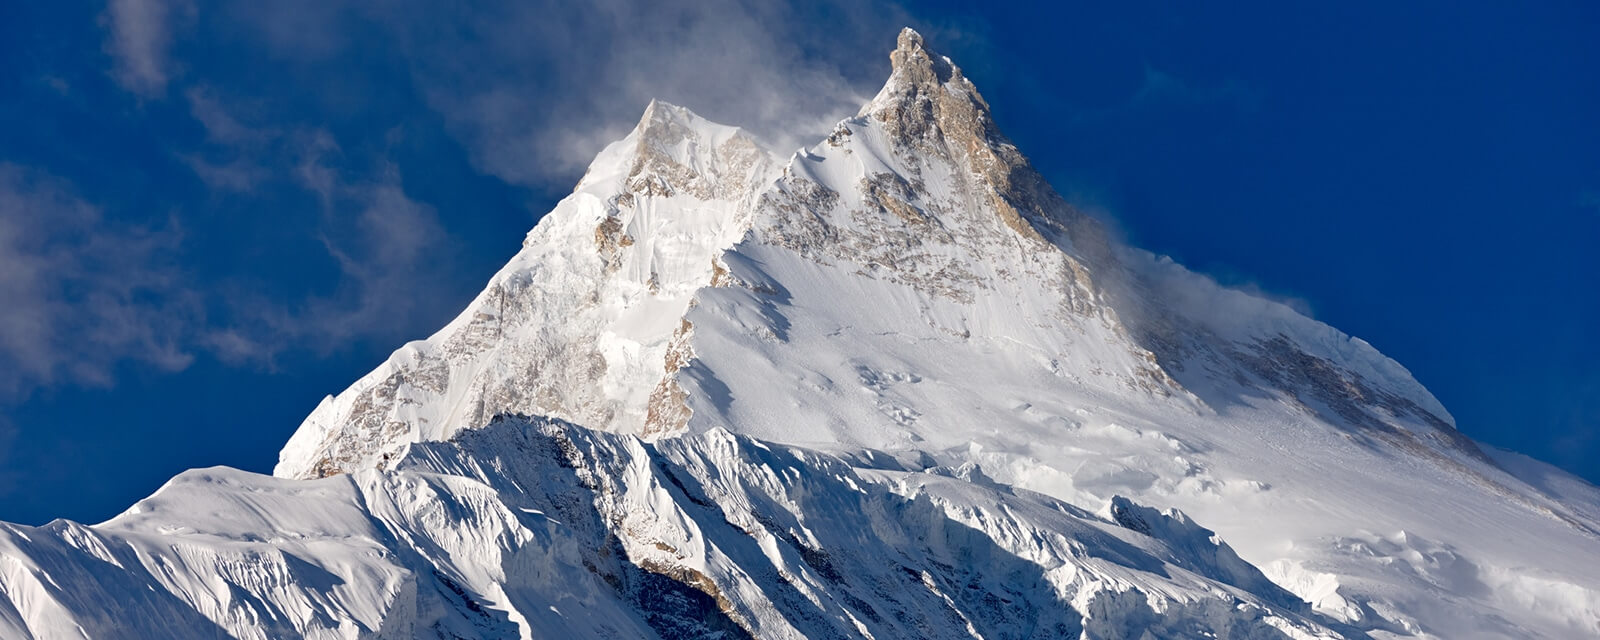 Manaslu is a large, snow covered peak in the Himalaya. It is the eighth tallest mountain in the world.